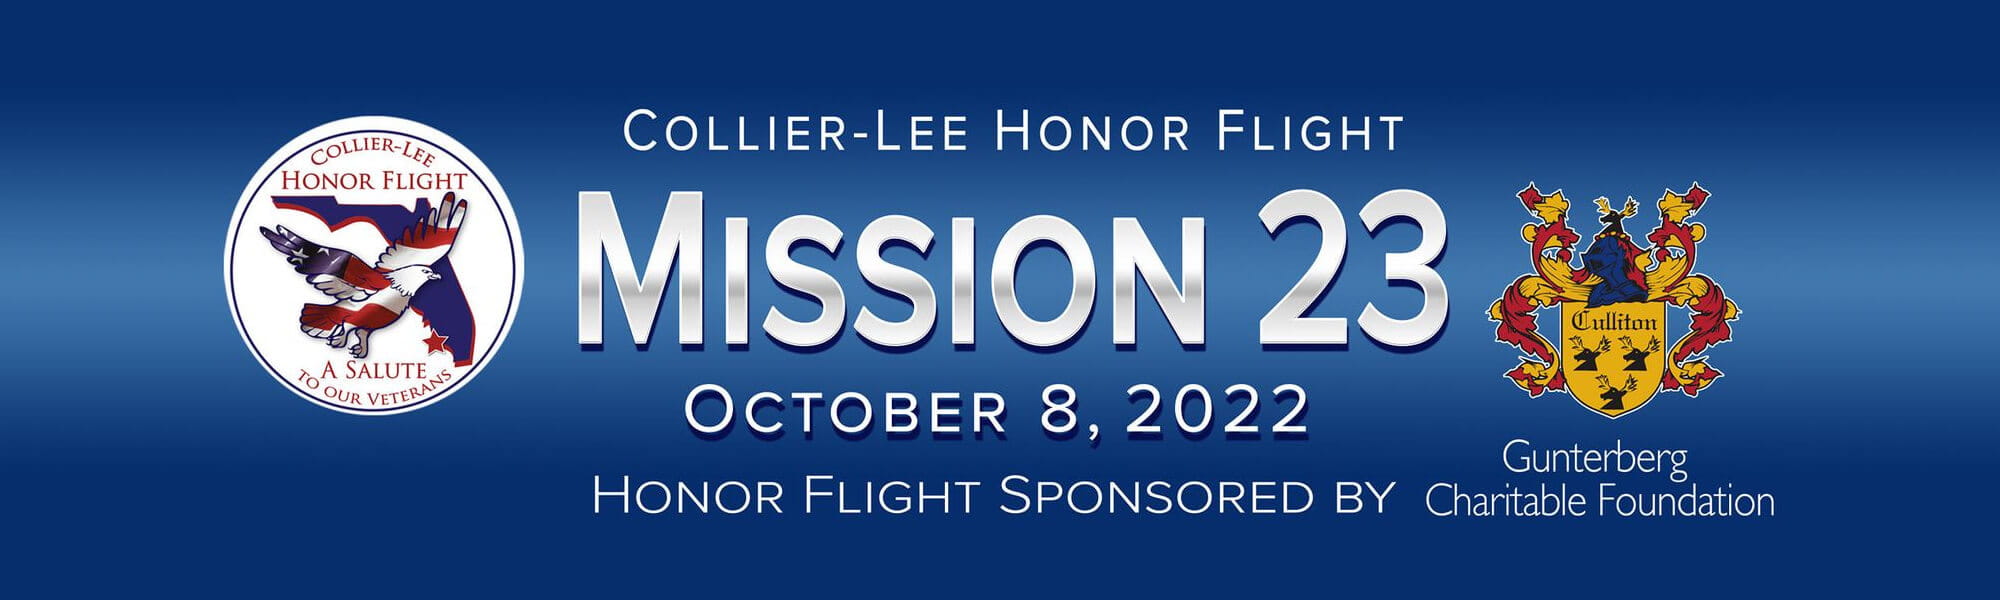 Mission 23, October 8th 2022.